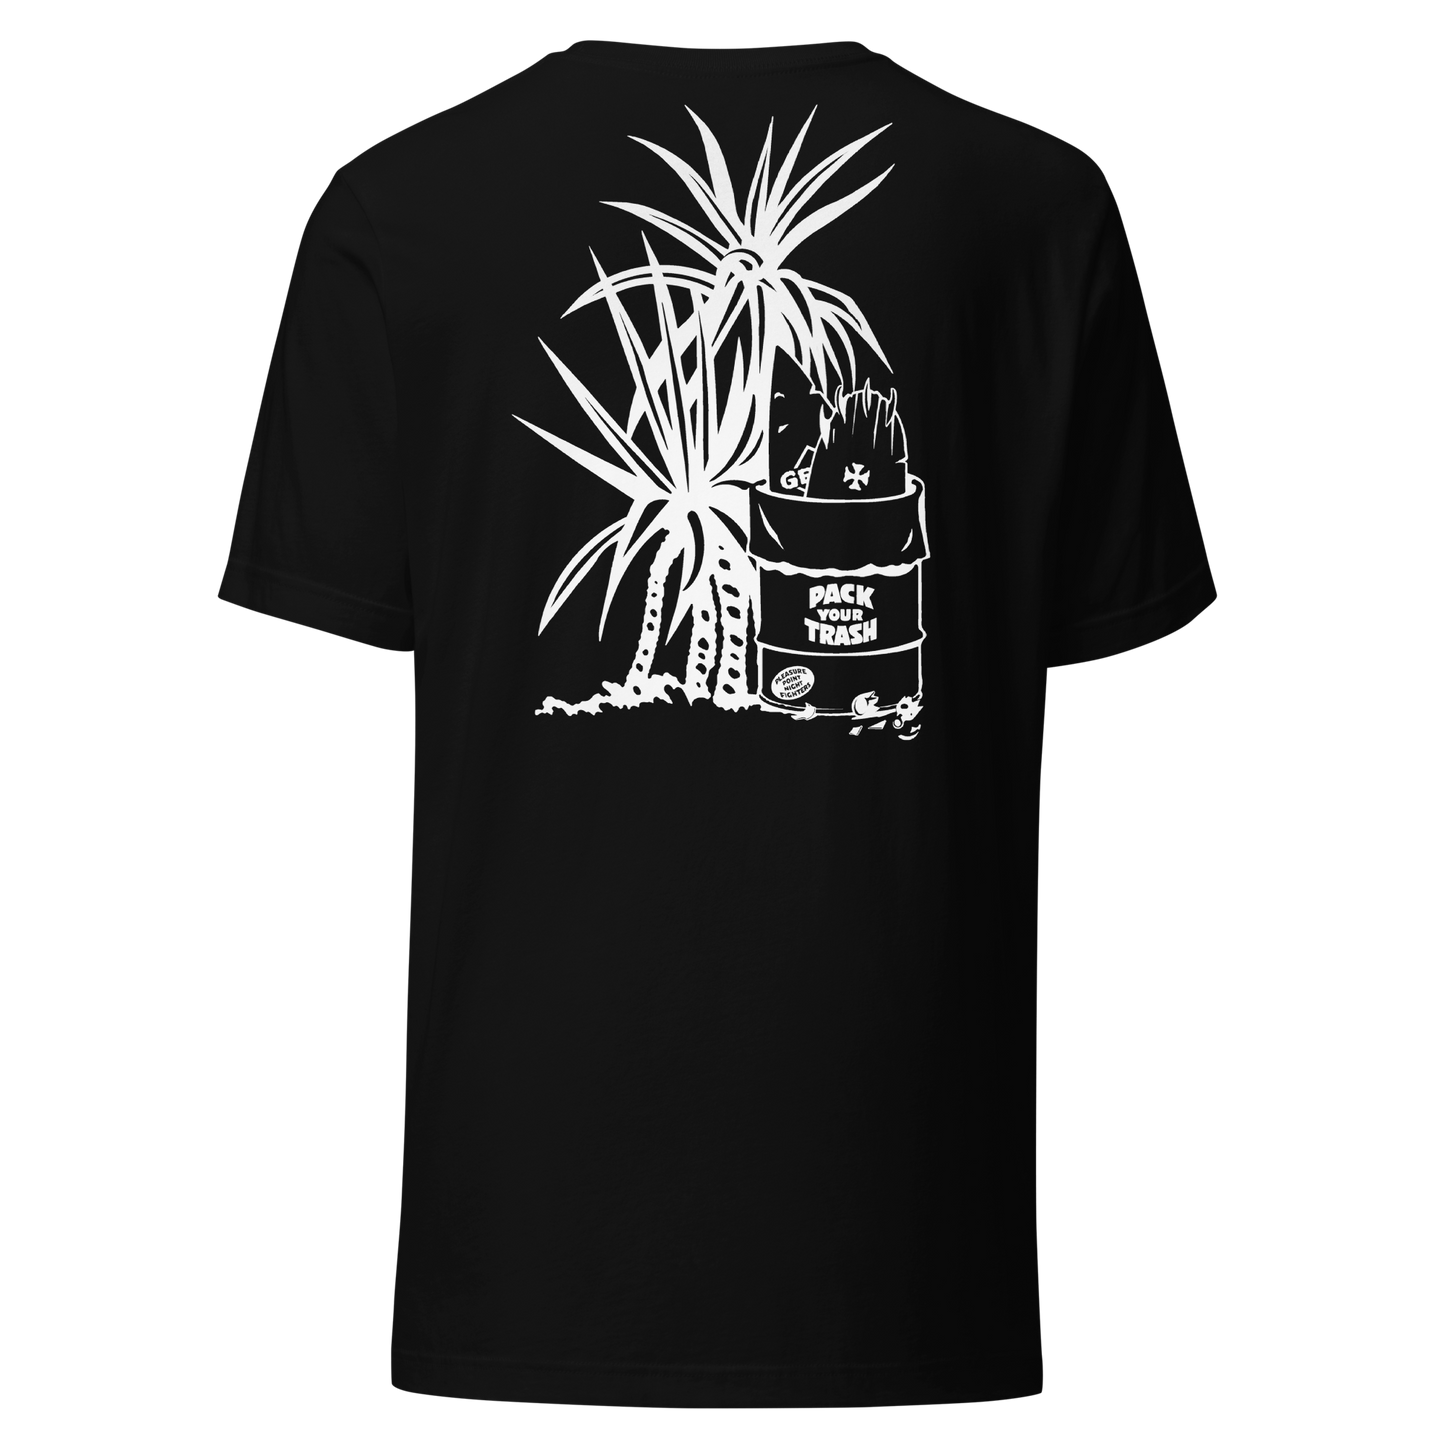 Pack Your Trash - Yucca + Can - White on Dark -Unisex t-shirt